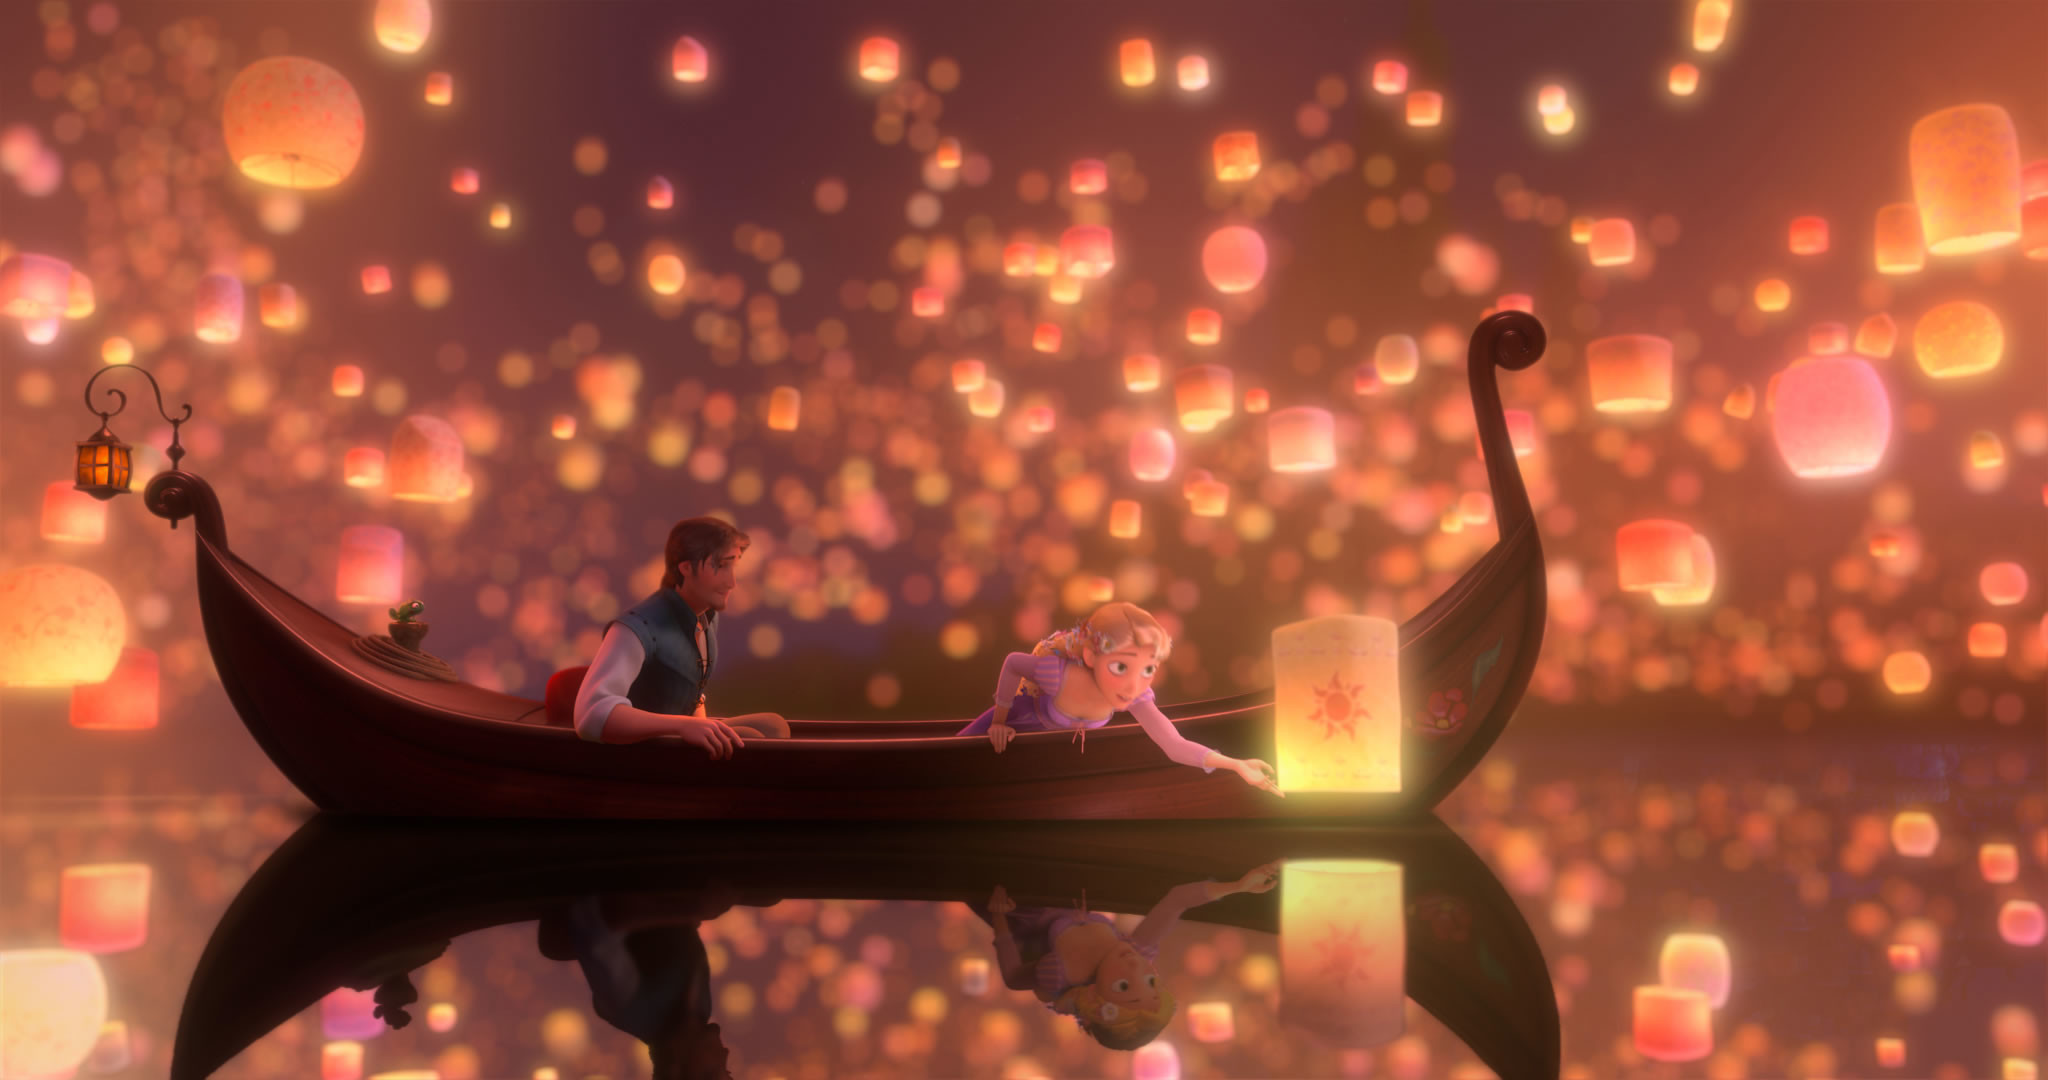 2048x1080 Disney Challenge Question Most Magical Moment - The lantern scene in Tangled  was so magical for me! There didn't need to be magic wands or fairy  dust--the ...